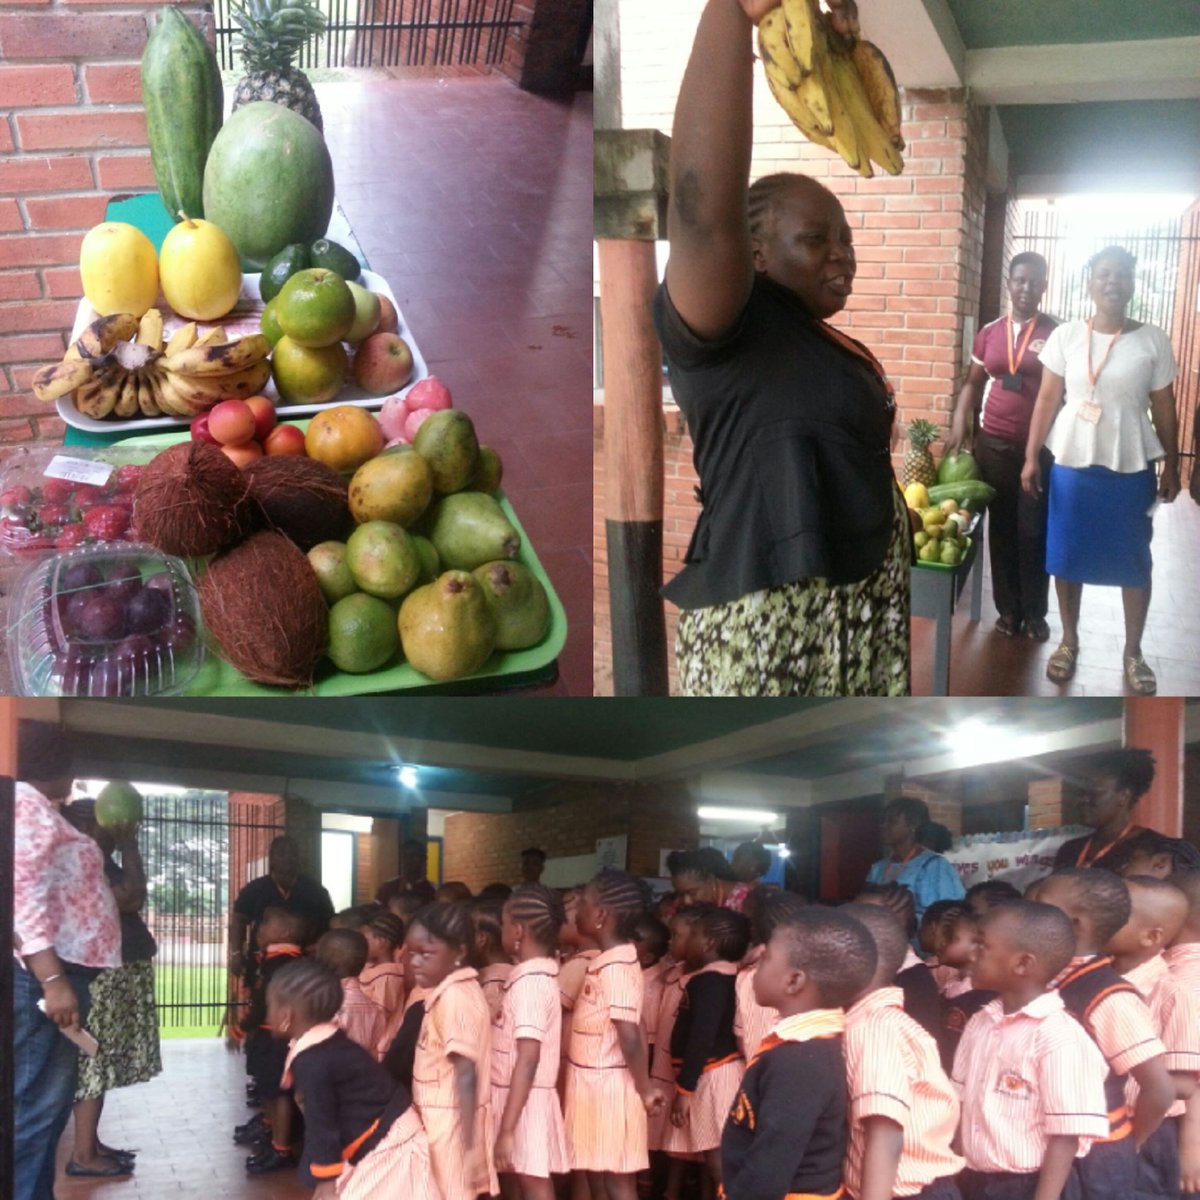 During the kindergarten assembly today, the pupils were taught names of common fruits we have in nigeria and their health benefits. Eating plenty of fruits may help reduce the risk of many diseases, including heart disease, high blood pressure, and some cancers.